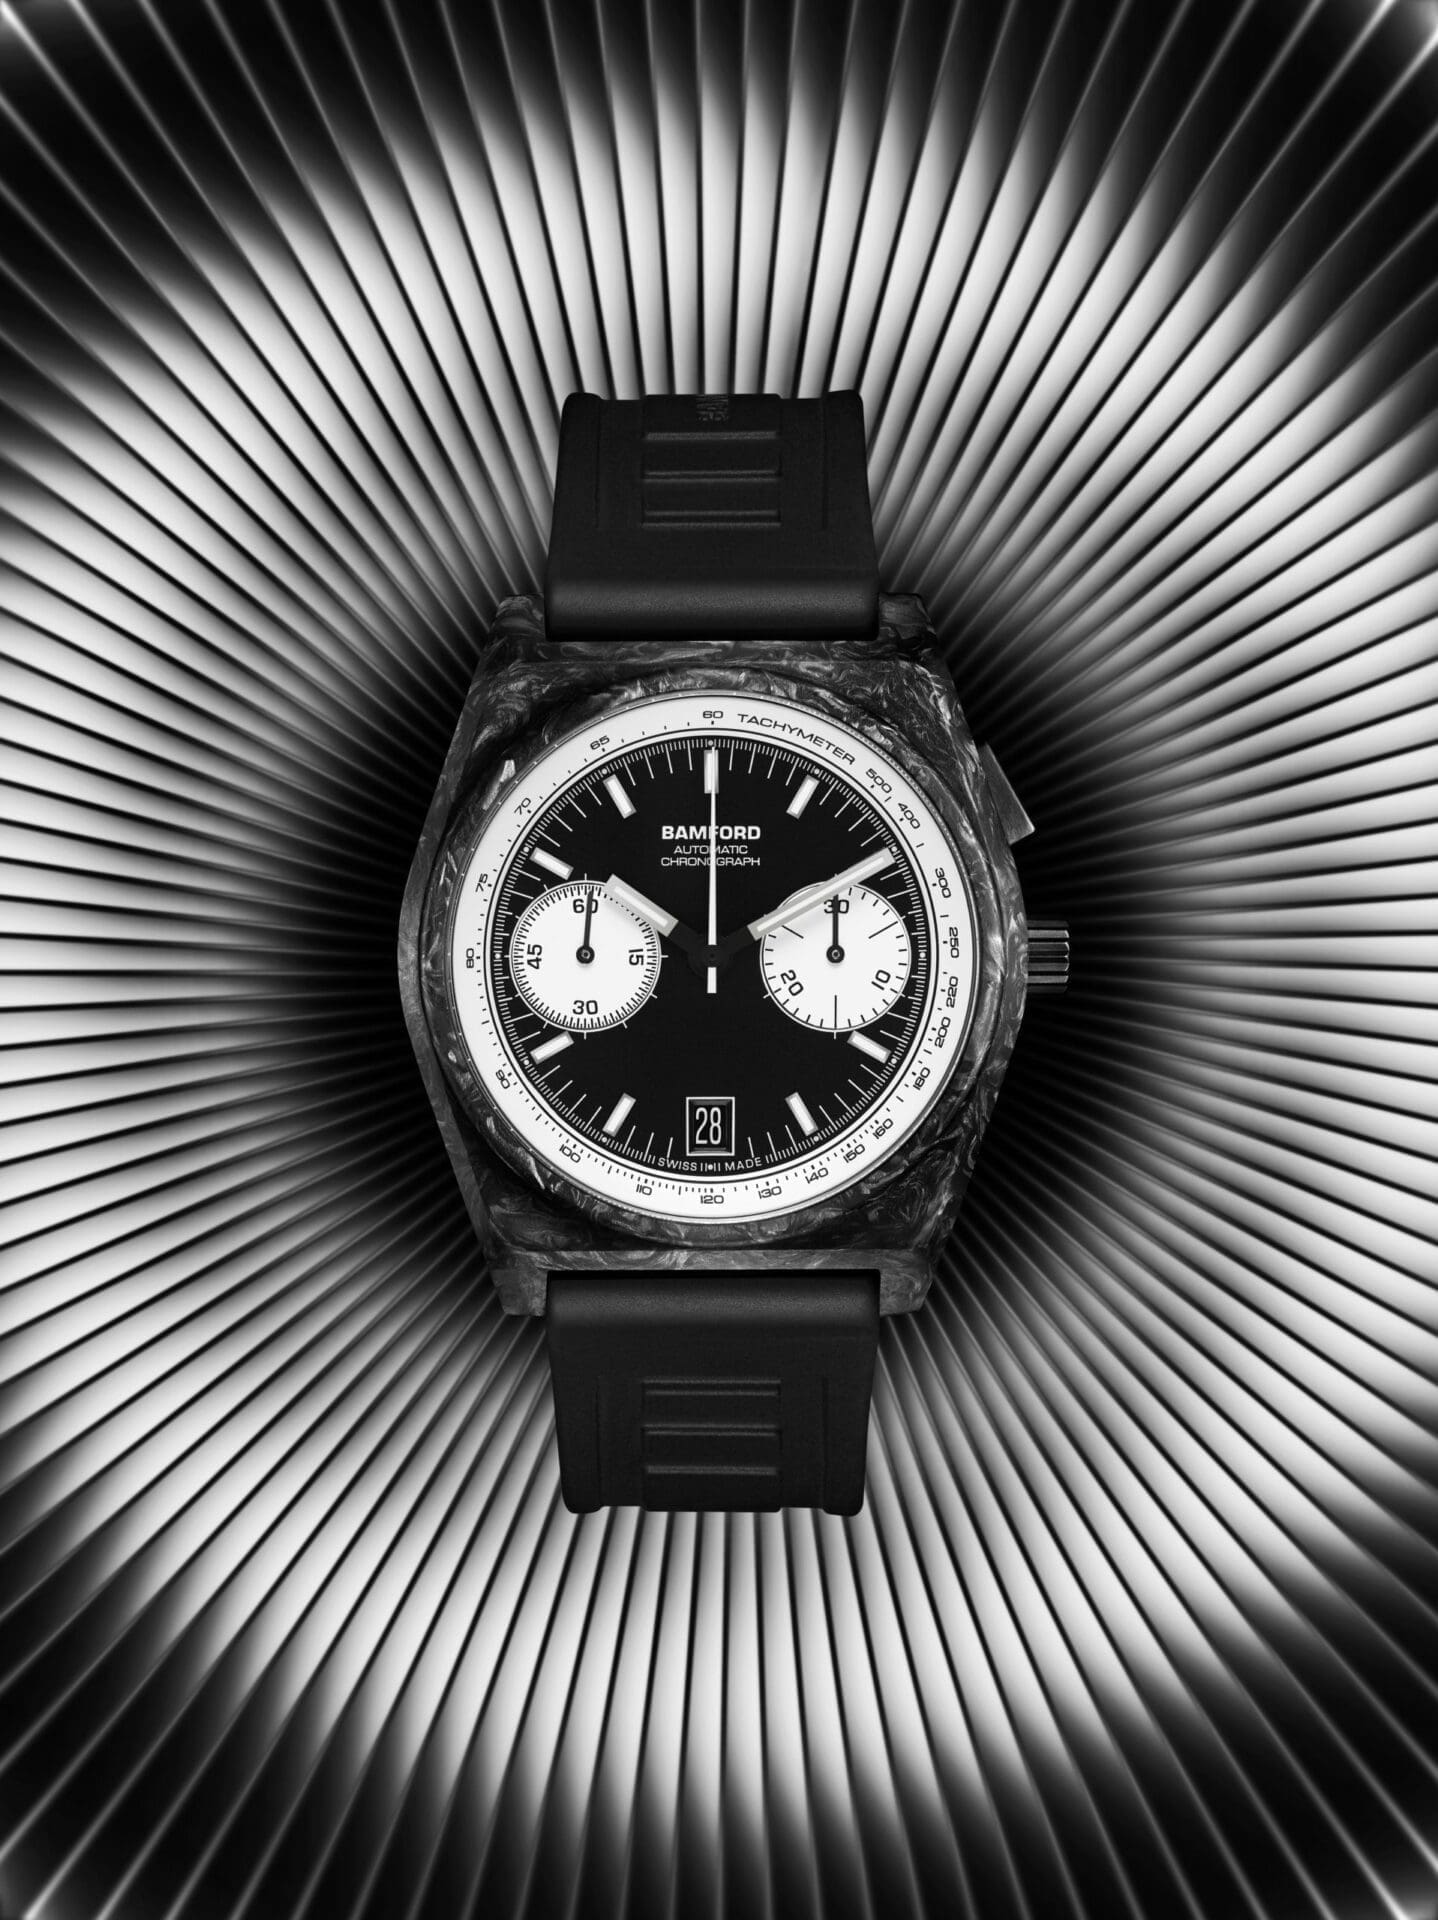 Bamford takes a step out of their comfort zone with a cracking monopusher chronograph    